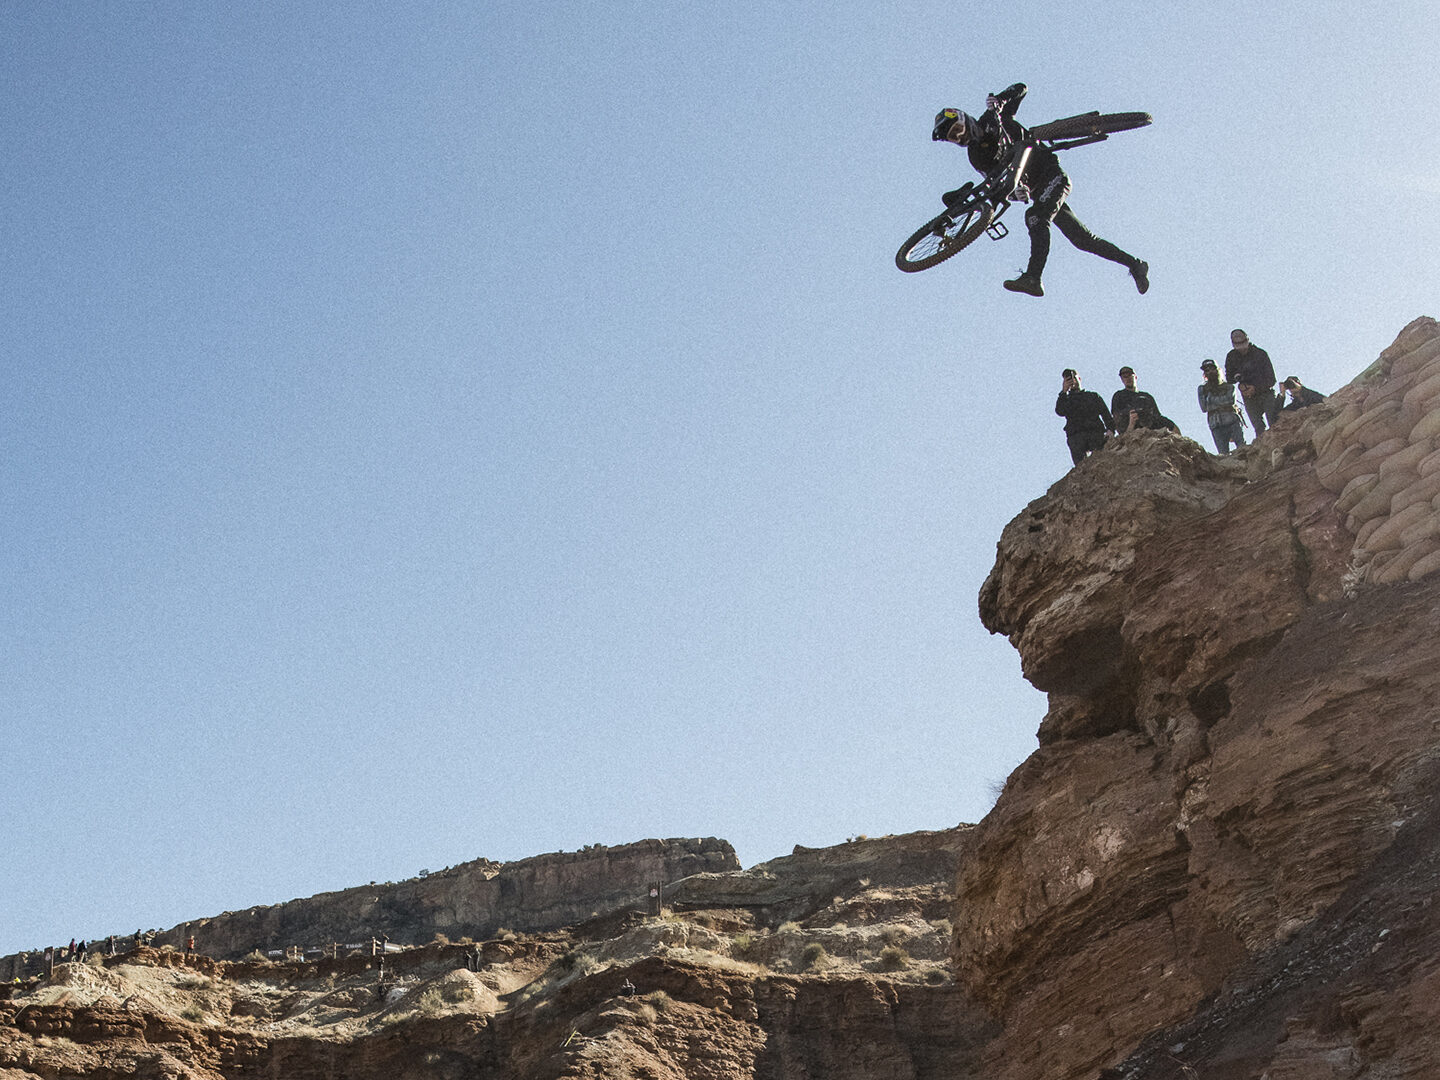 Brandon Semenuk throwing a huge tailwhip off of a cliff at Red Bull Rampage.